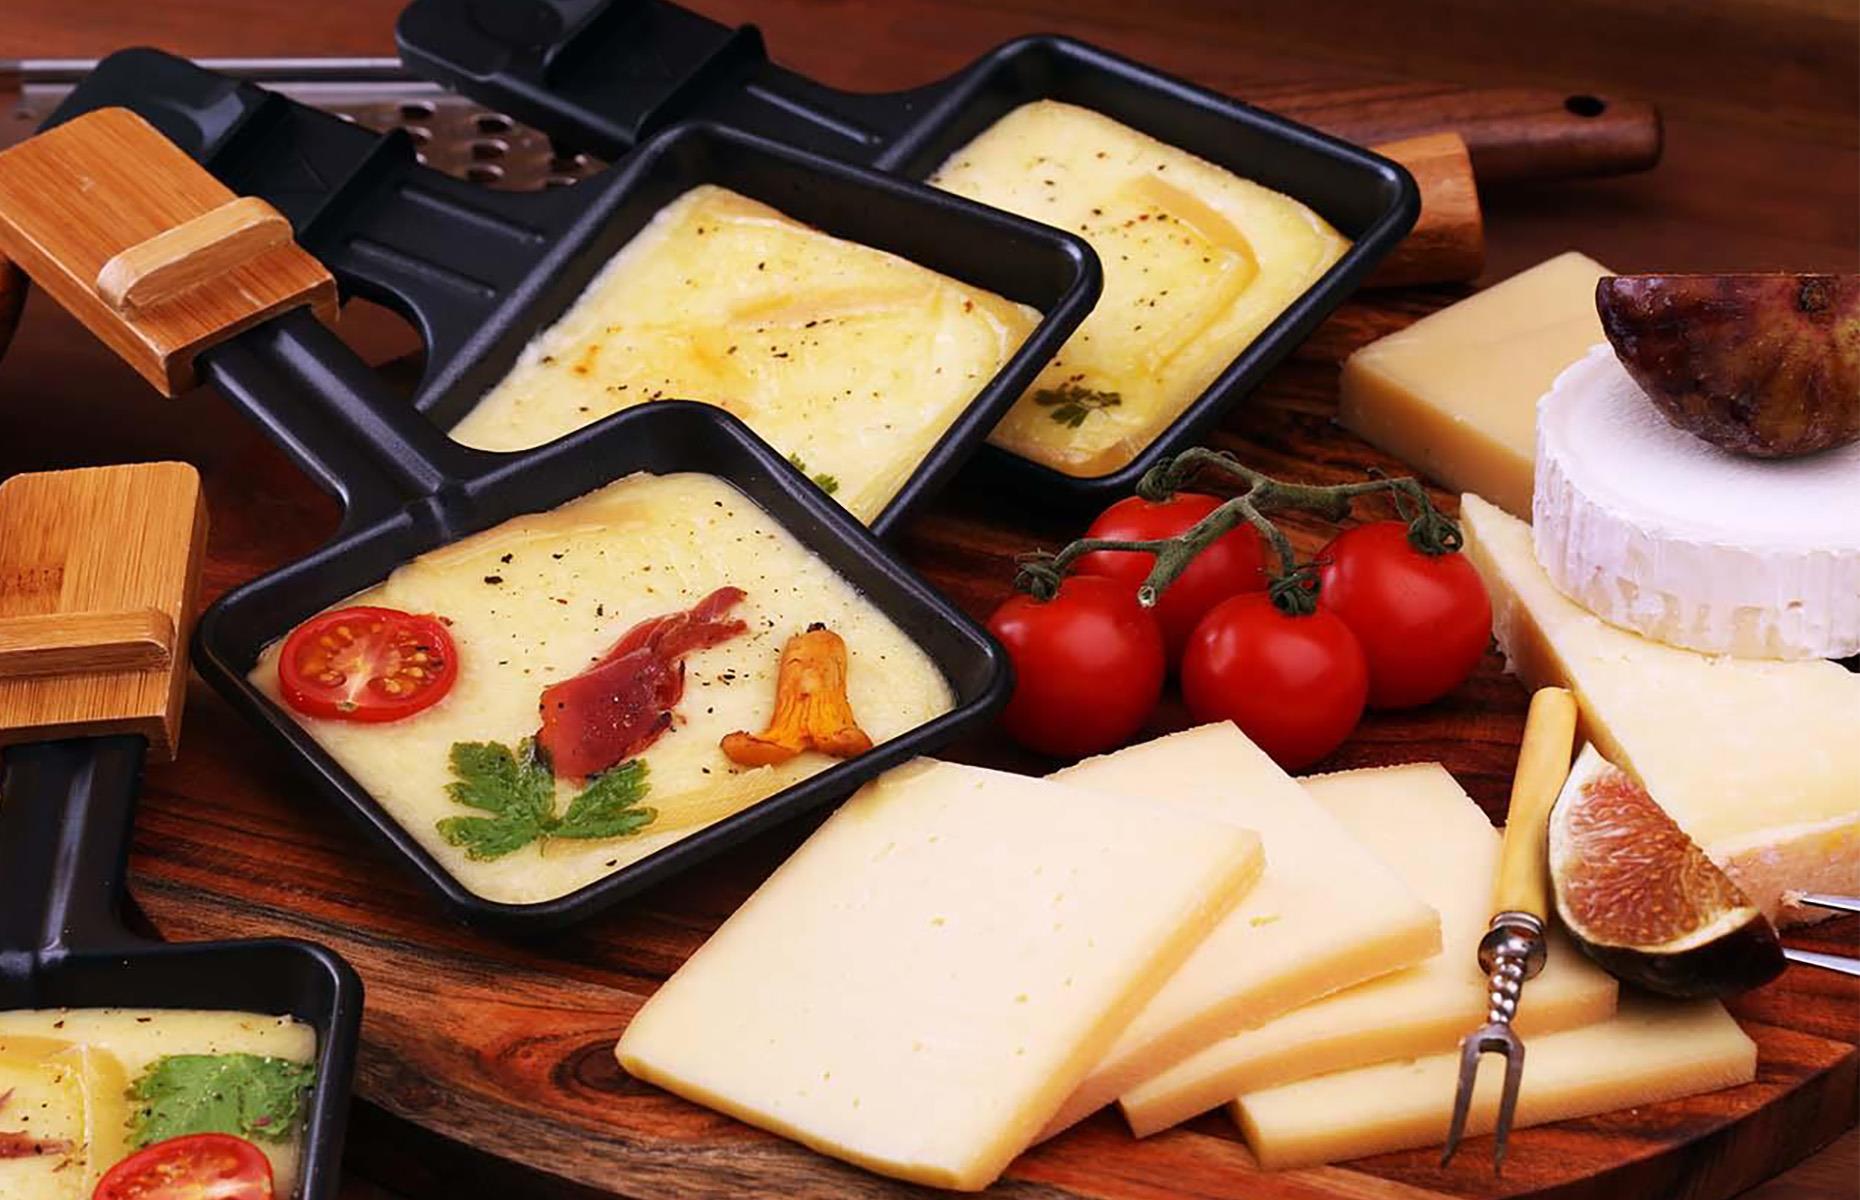 <p>Gooey cheese on top of everything? Yes please! This board pairs raclette cheese with roasted potatoes, breadsticks, cherry tomatoes, crackers and chutney. If you have a raclette grill, use it to melt your cheese before placing it on a heat-resistant board. If you don't have one, use a cast-iron pan to melt the cheese in the oven, then pour it over your arranged toppings.</p>